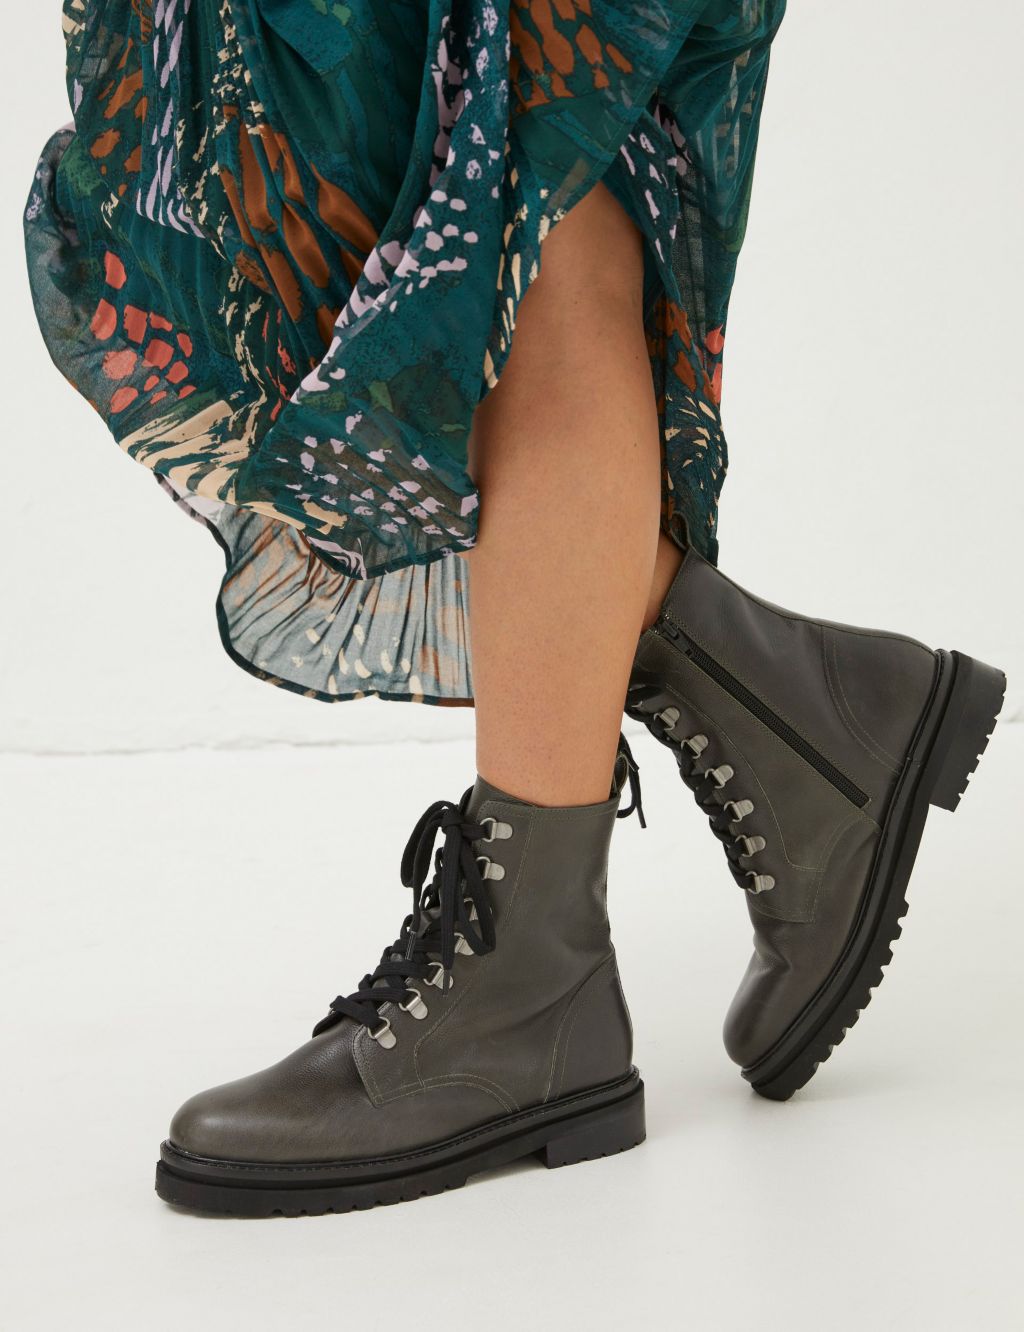 Leather Hiker Lace Up Cleated Ankle Boots image 5